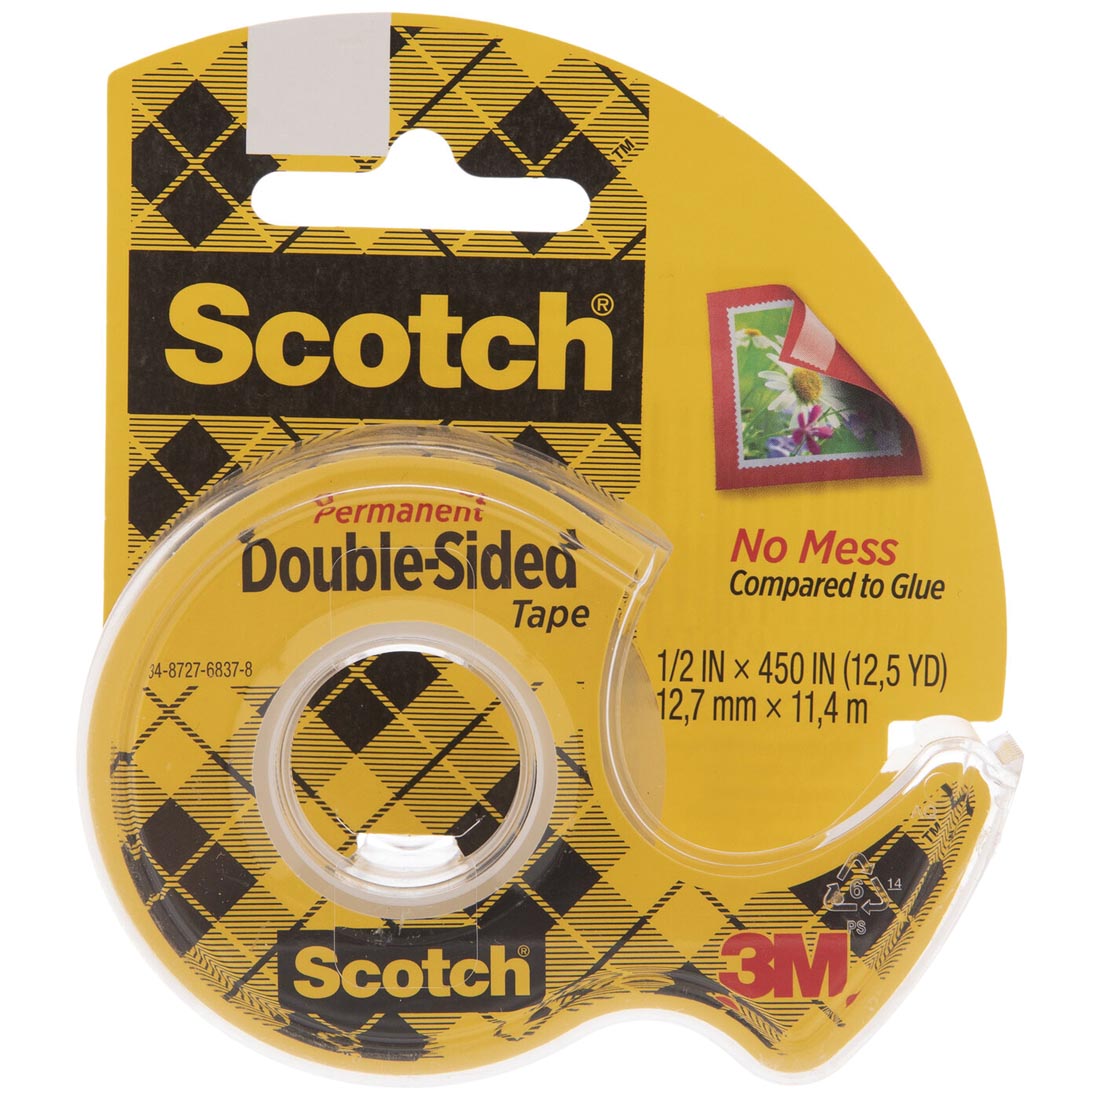 Scotch #665 Double Sided Permanent Tape dispenser pack, 1/2 x 450" roll